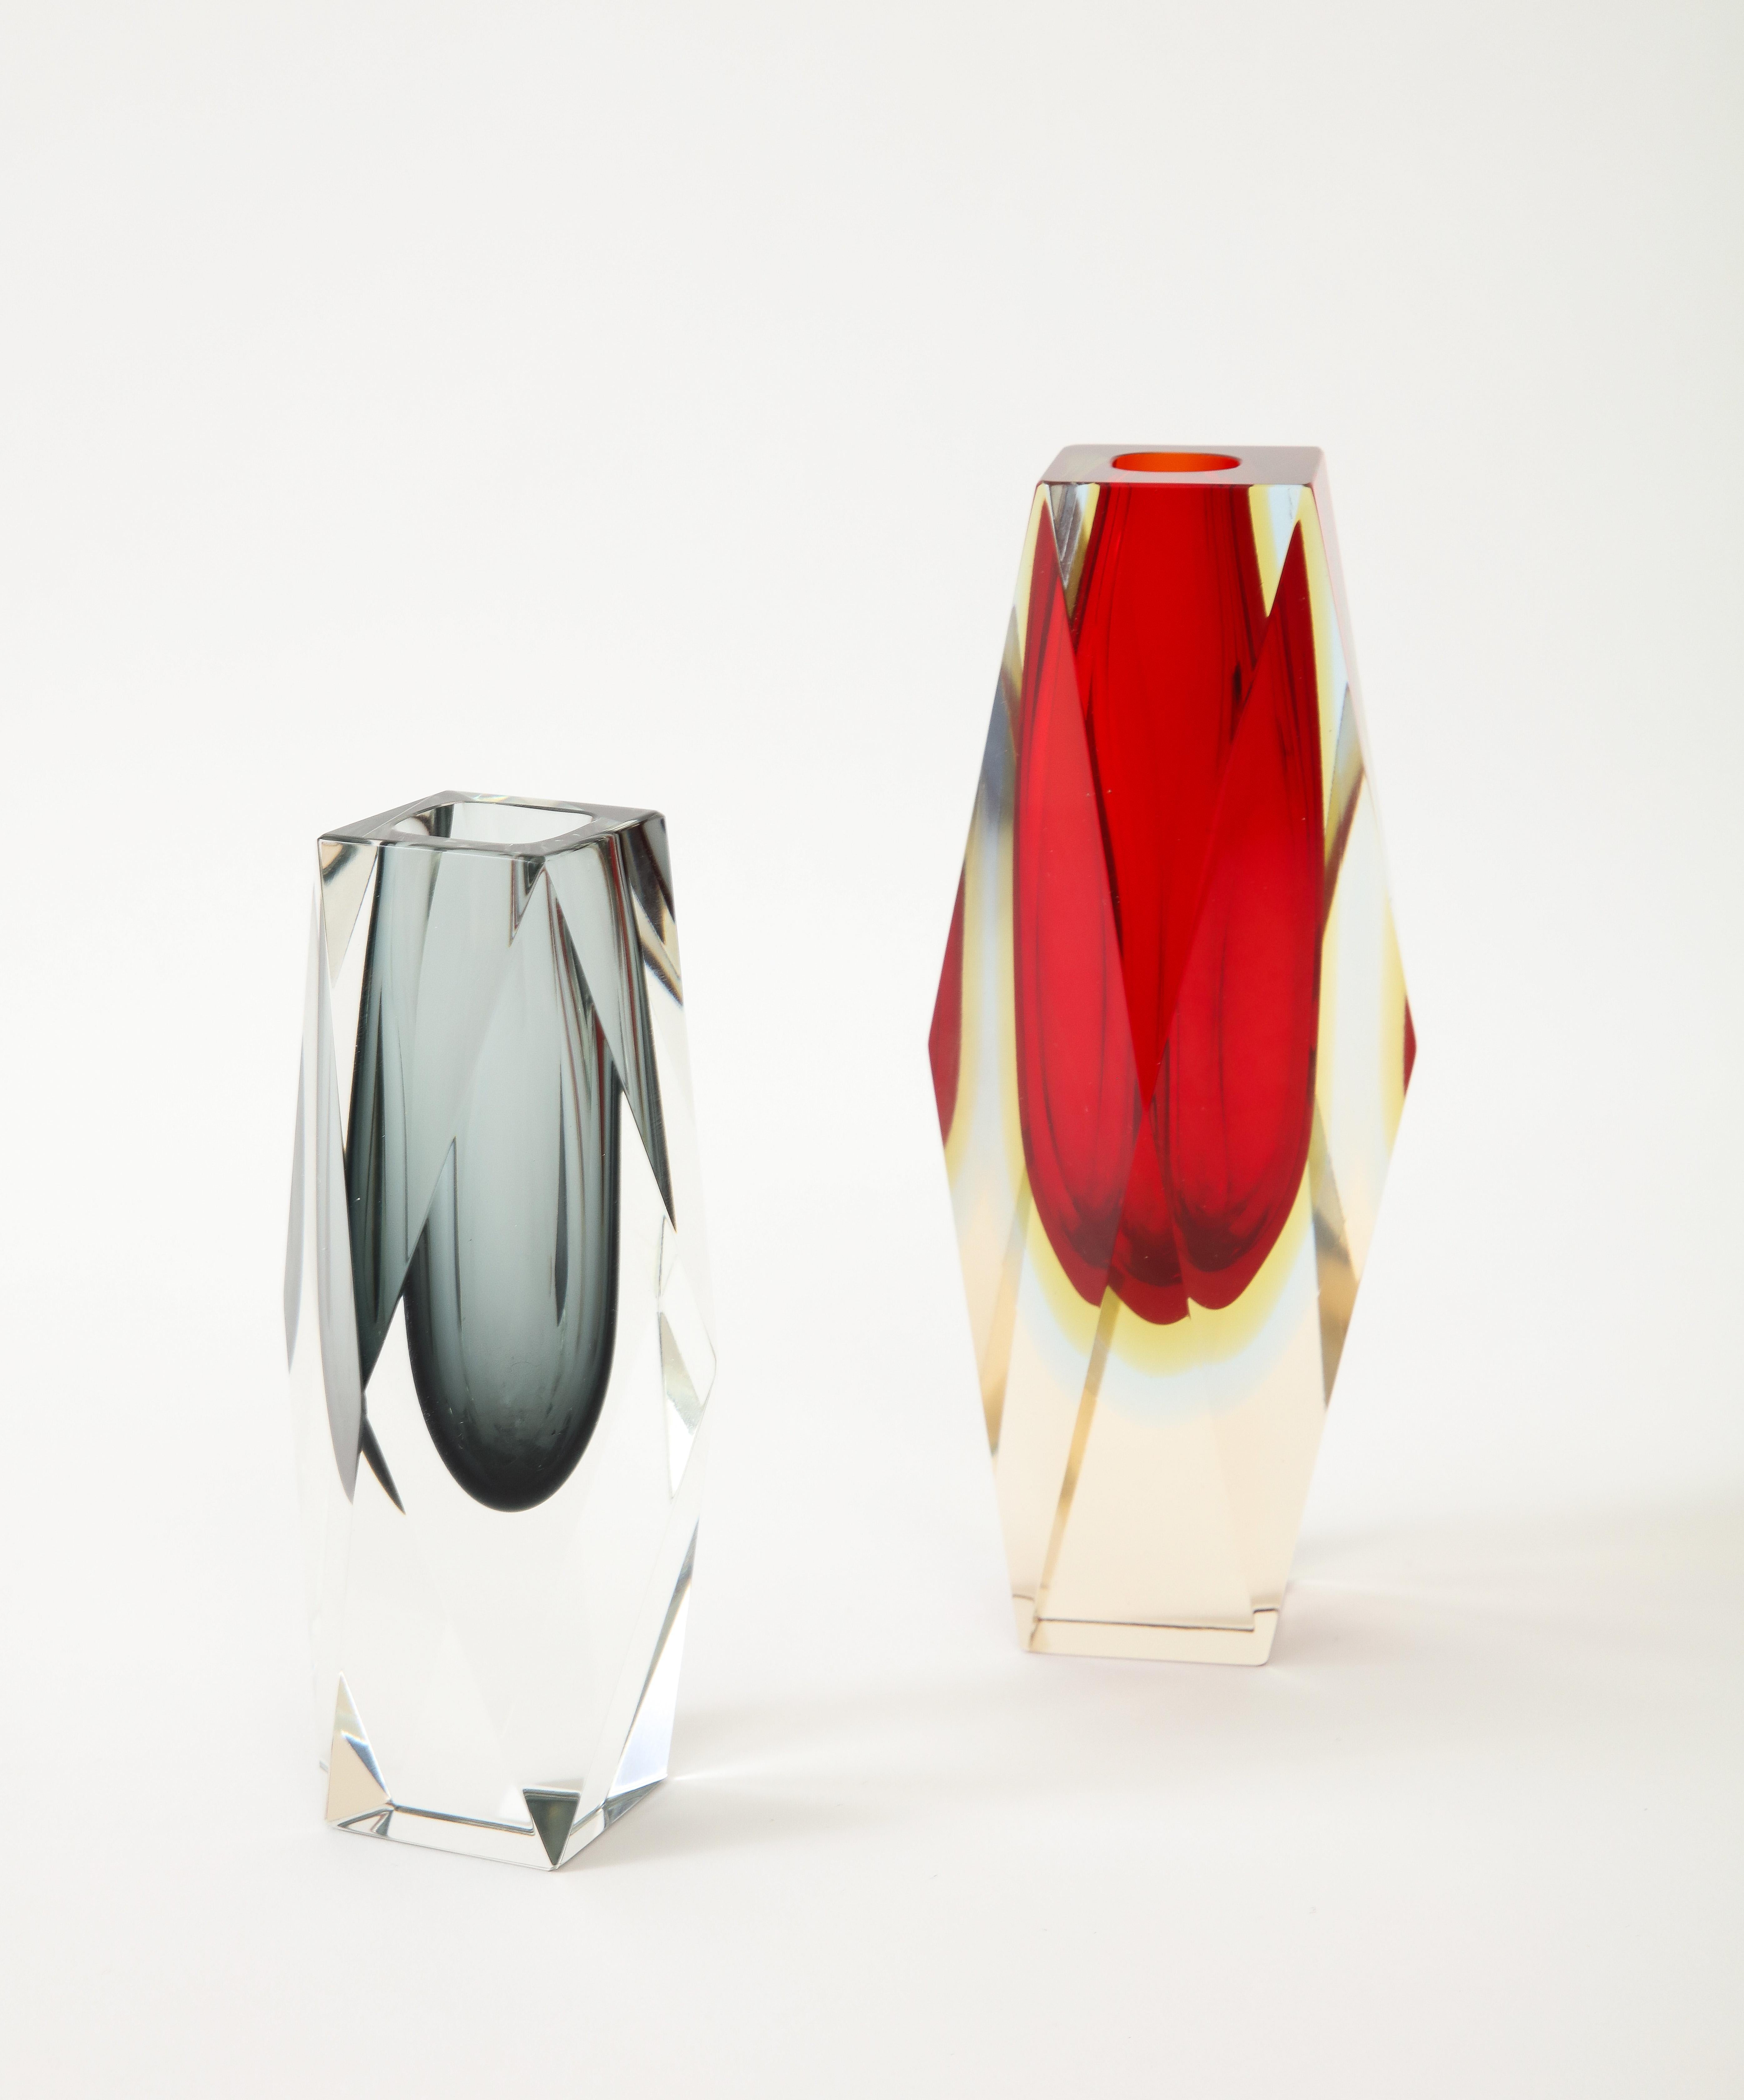 Set of two 1970's  Murano glass vases designed by Flavio Poli.
The vases are made in the Sommerso technique and have a wonderful block
form to them.
The Red vase is 8